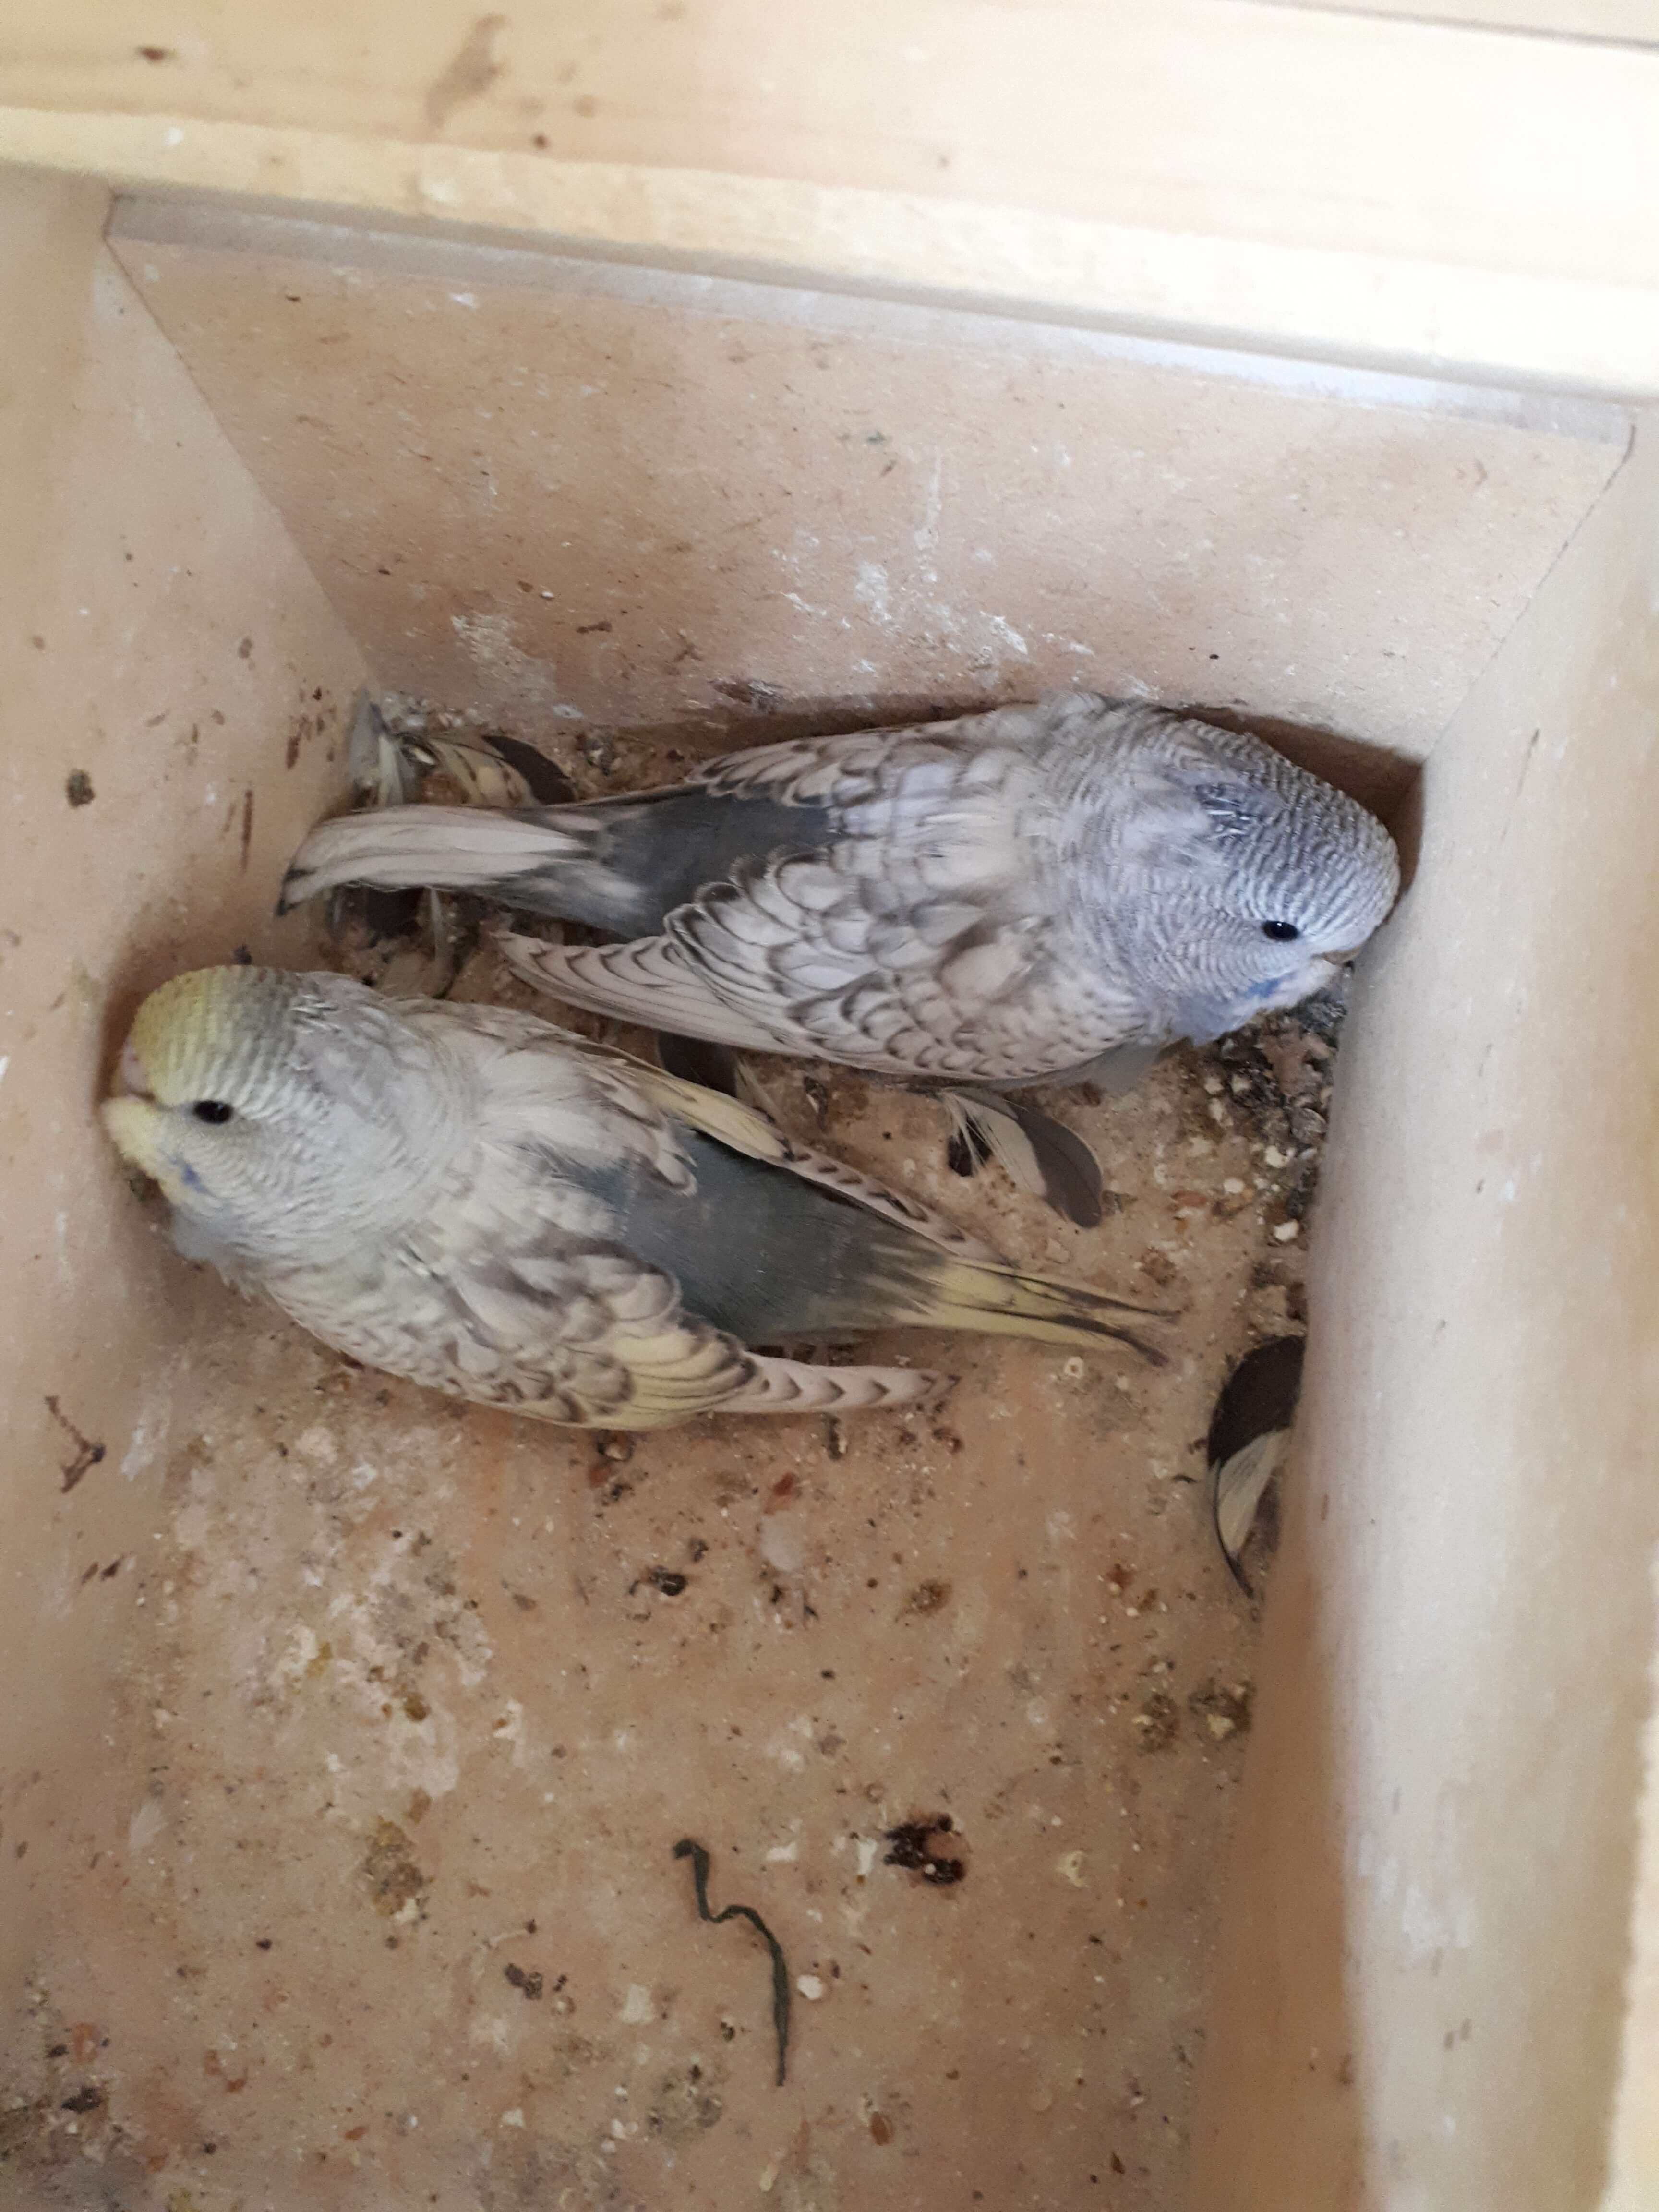 Baby budgies Geelong for your new best friend